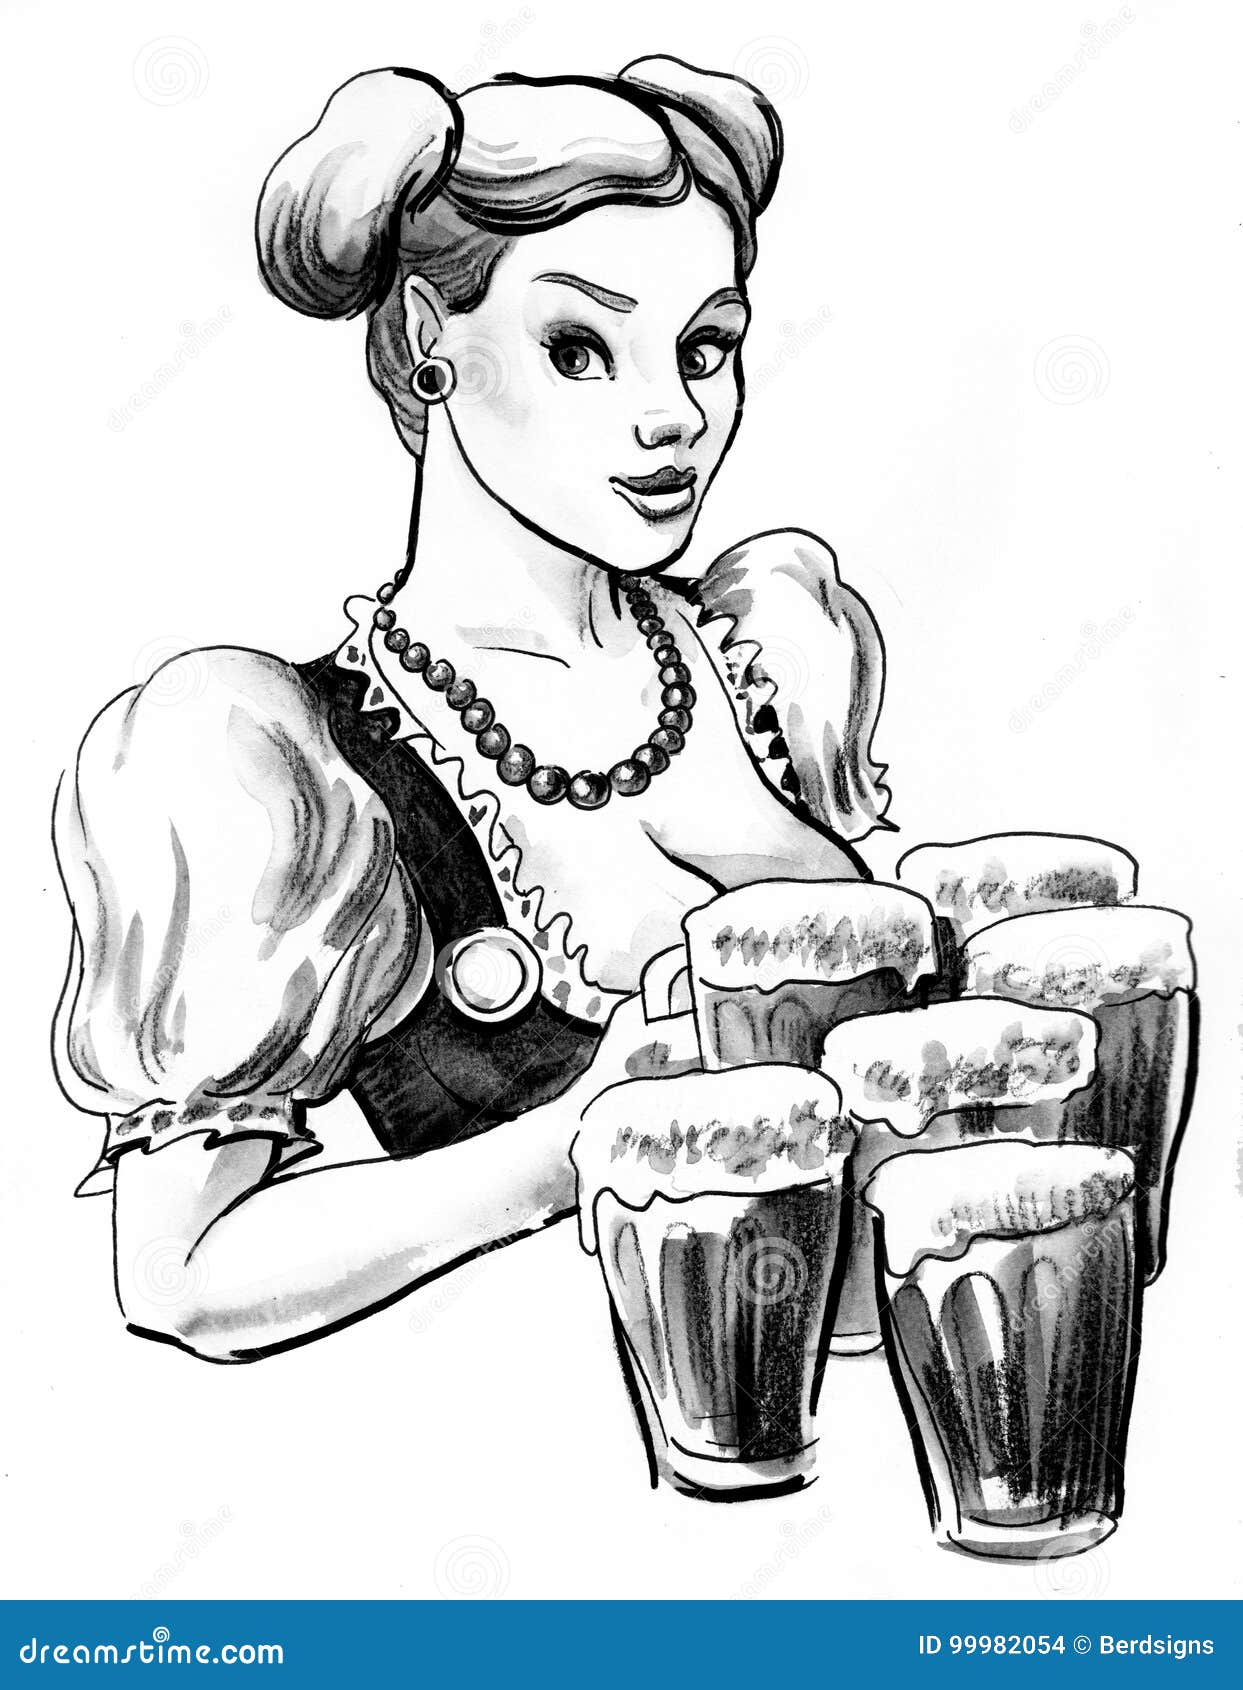 Girl with a beer mugs stock illustration. Illustration of woman - 99982054